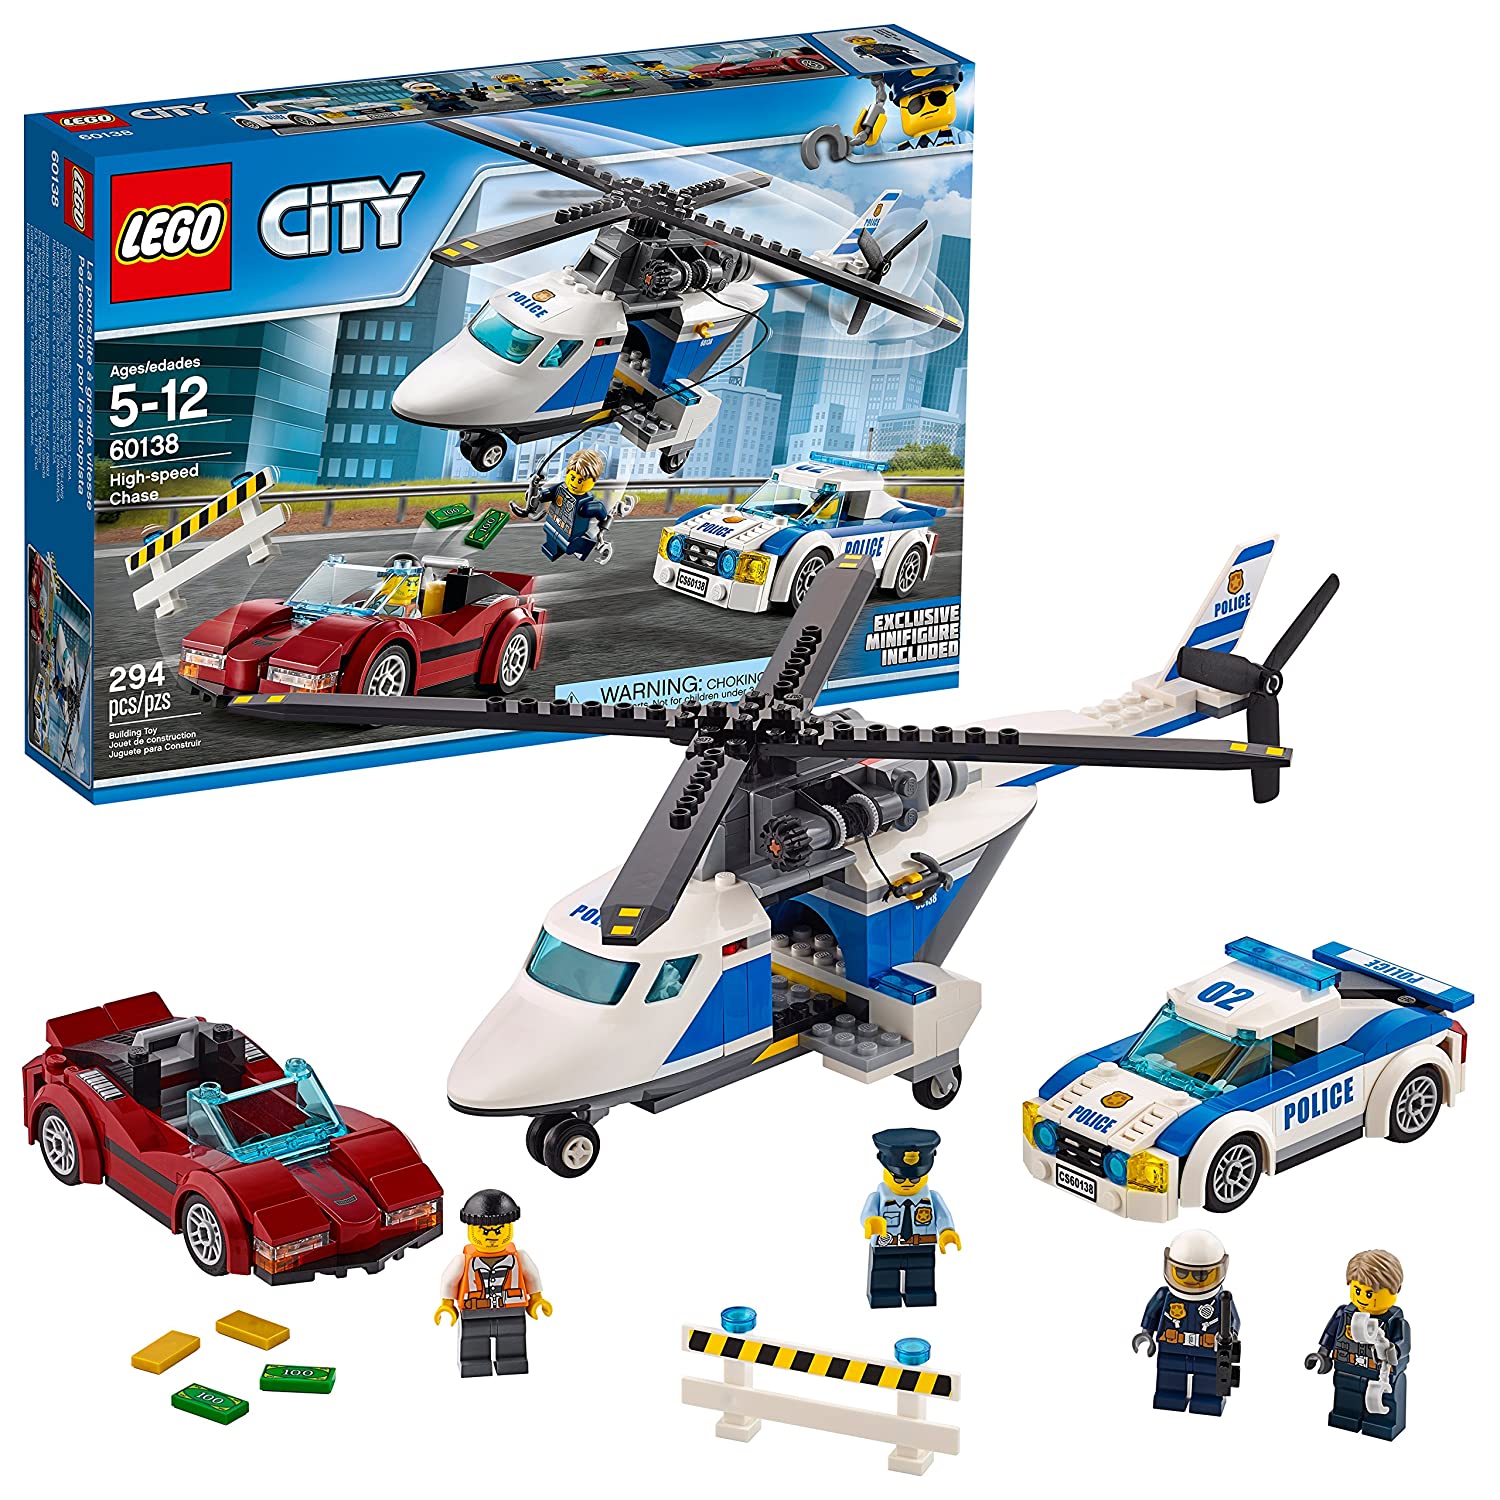 9 Best LEGO Police Station Set 2023 - Buying Guide & Reviews 4